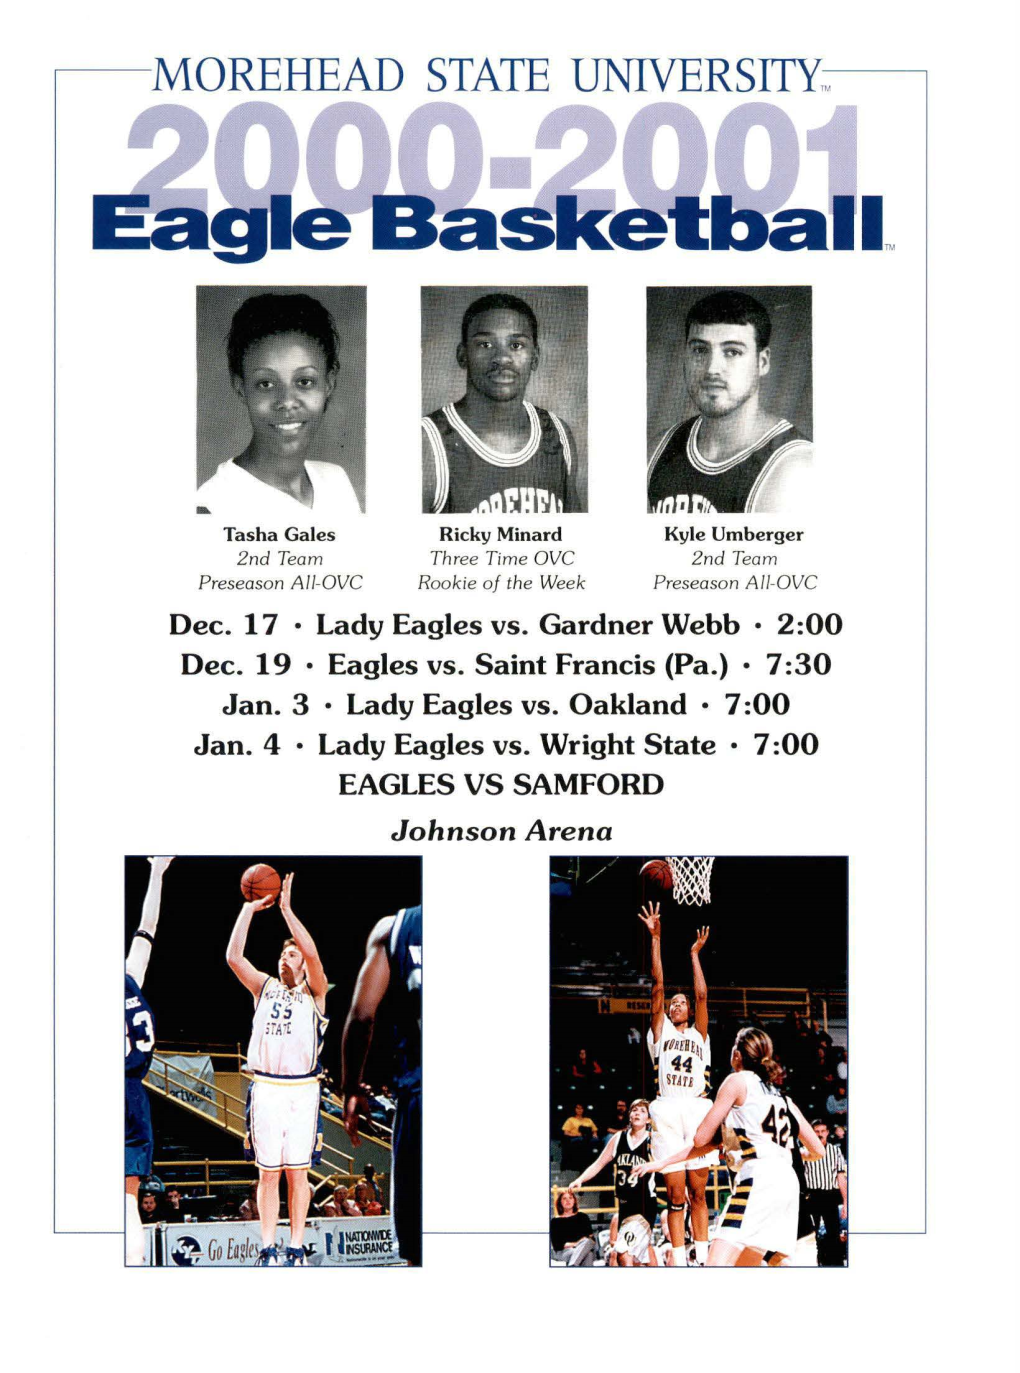 Lady Eagles & Eagles Basketball Games from December 17, 2000